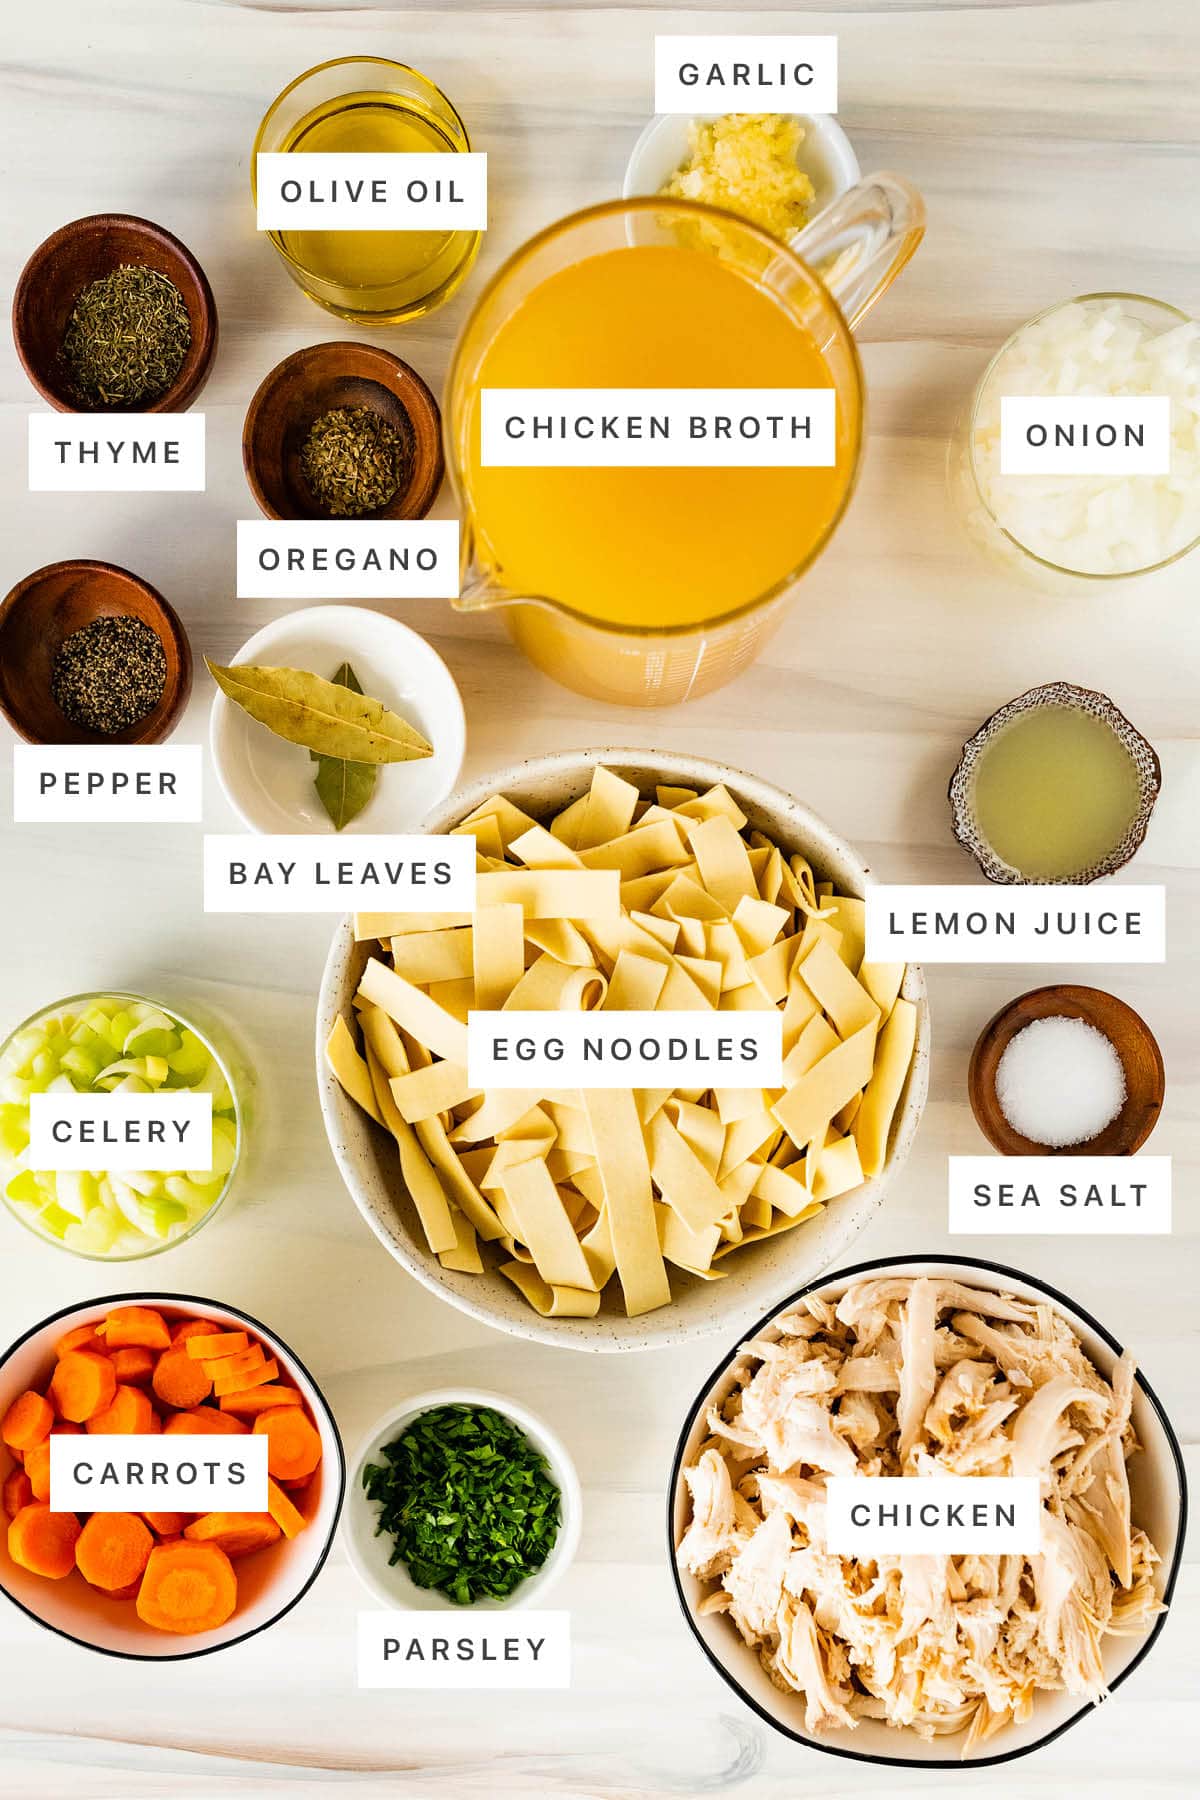 Ingredients measured out to make Chicken Noodle Soup: olive oil, garlic, thyme, oregano, chicken broth, onion, pepper, bay leaves, egg noodles, lemon juice, celery, sea salt, carrots, parsley and chicken.